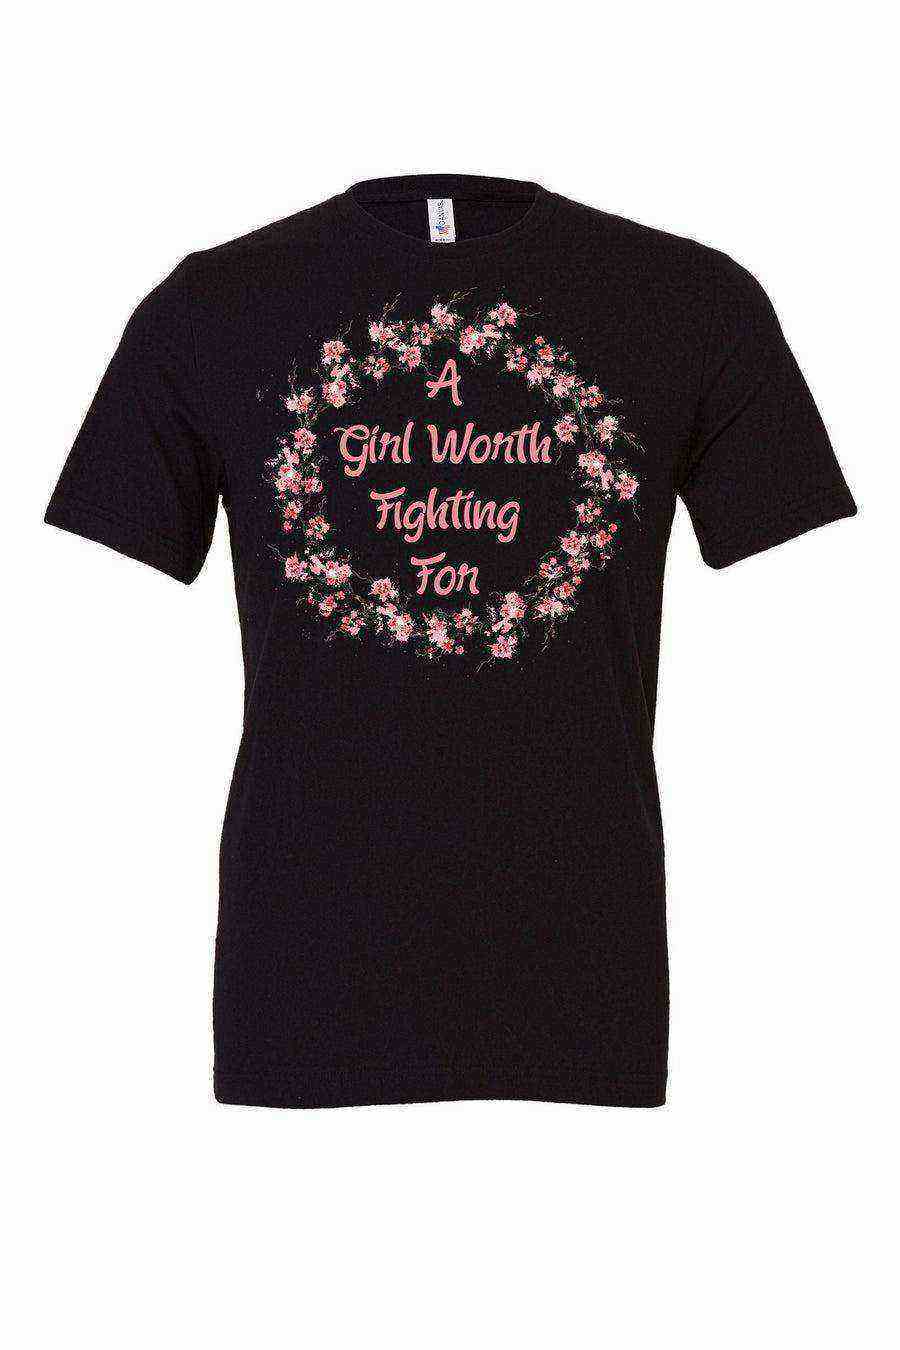 Womens | Mulan Shirt | A Girl Worth Fighting For - Dylan's Tees